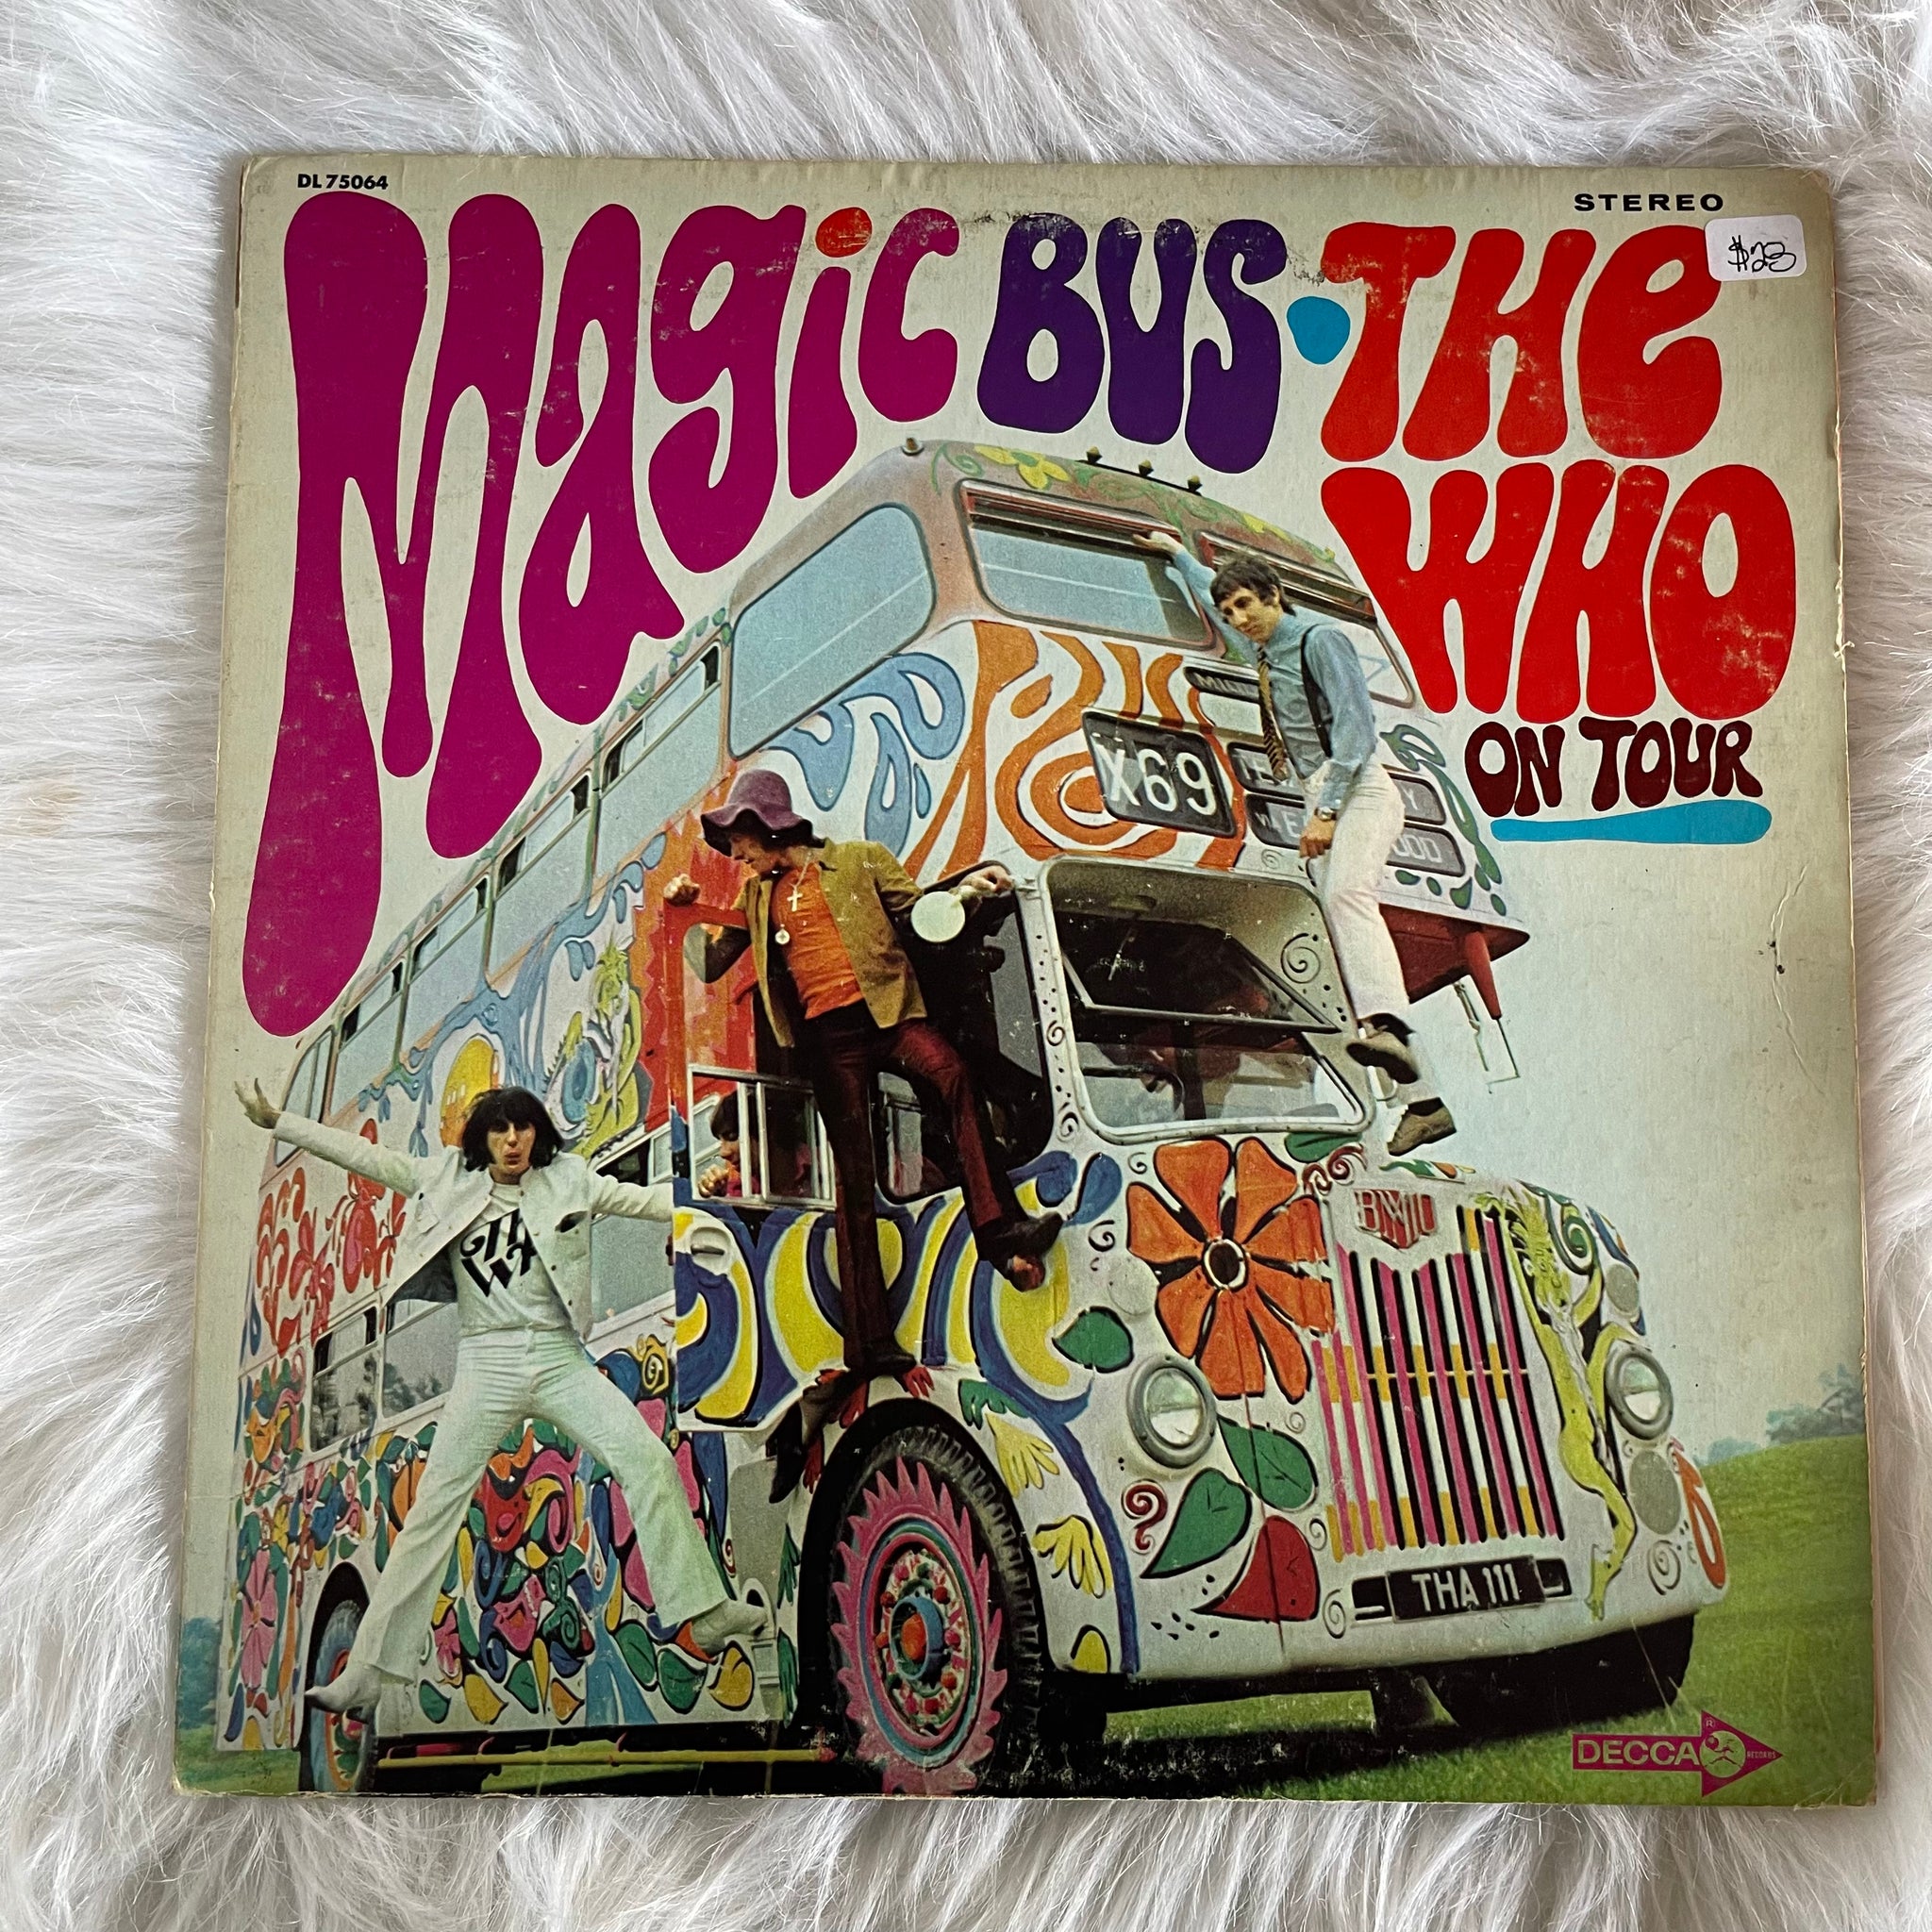 Who,The-Magic Bus/The Who on Tour – Vintage Vibes 420